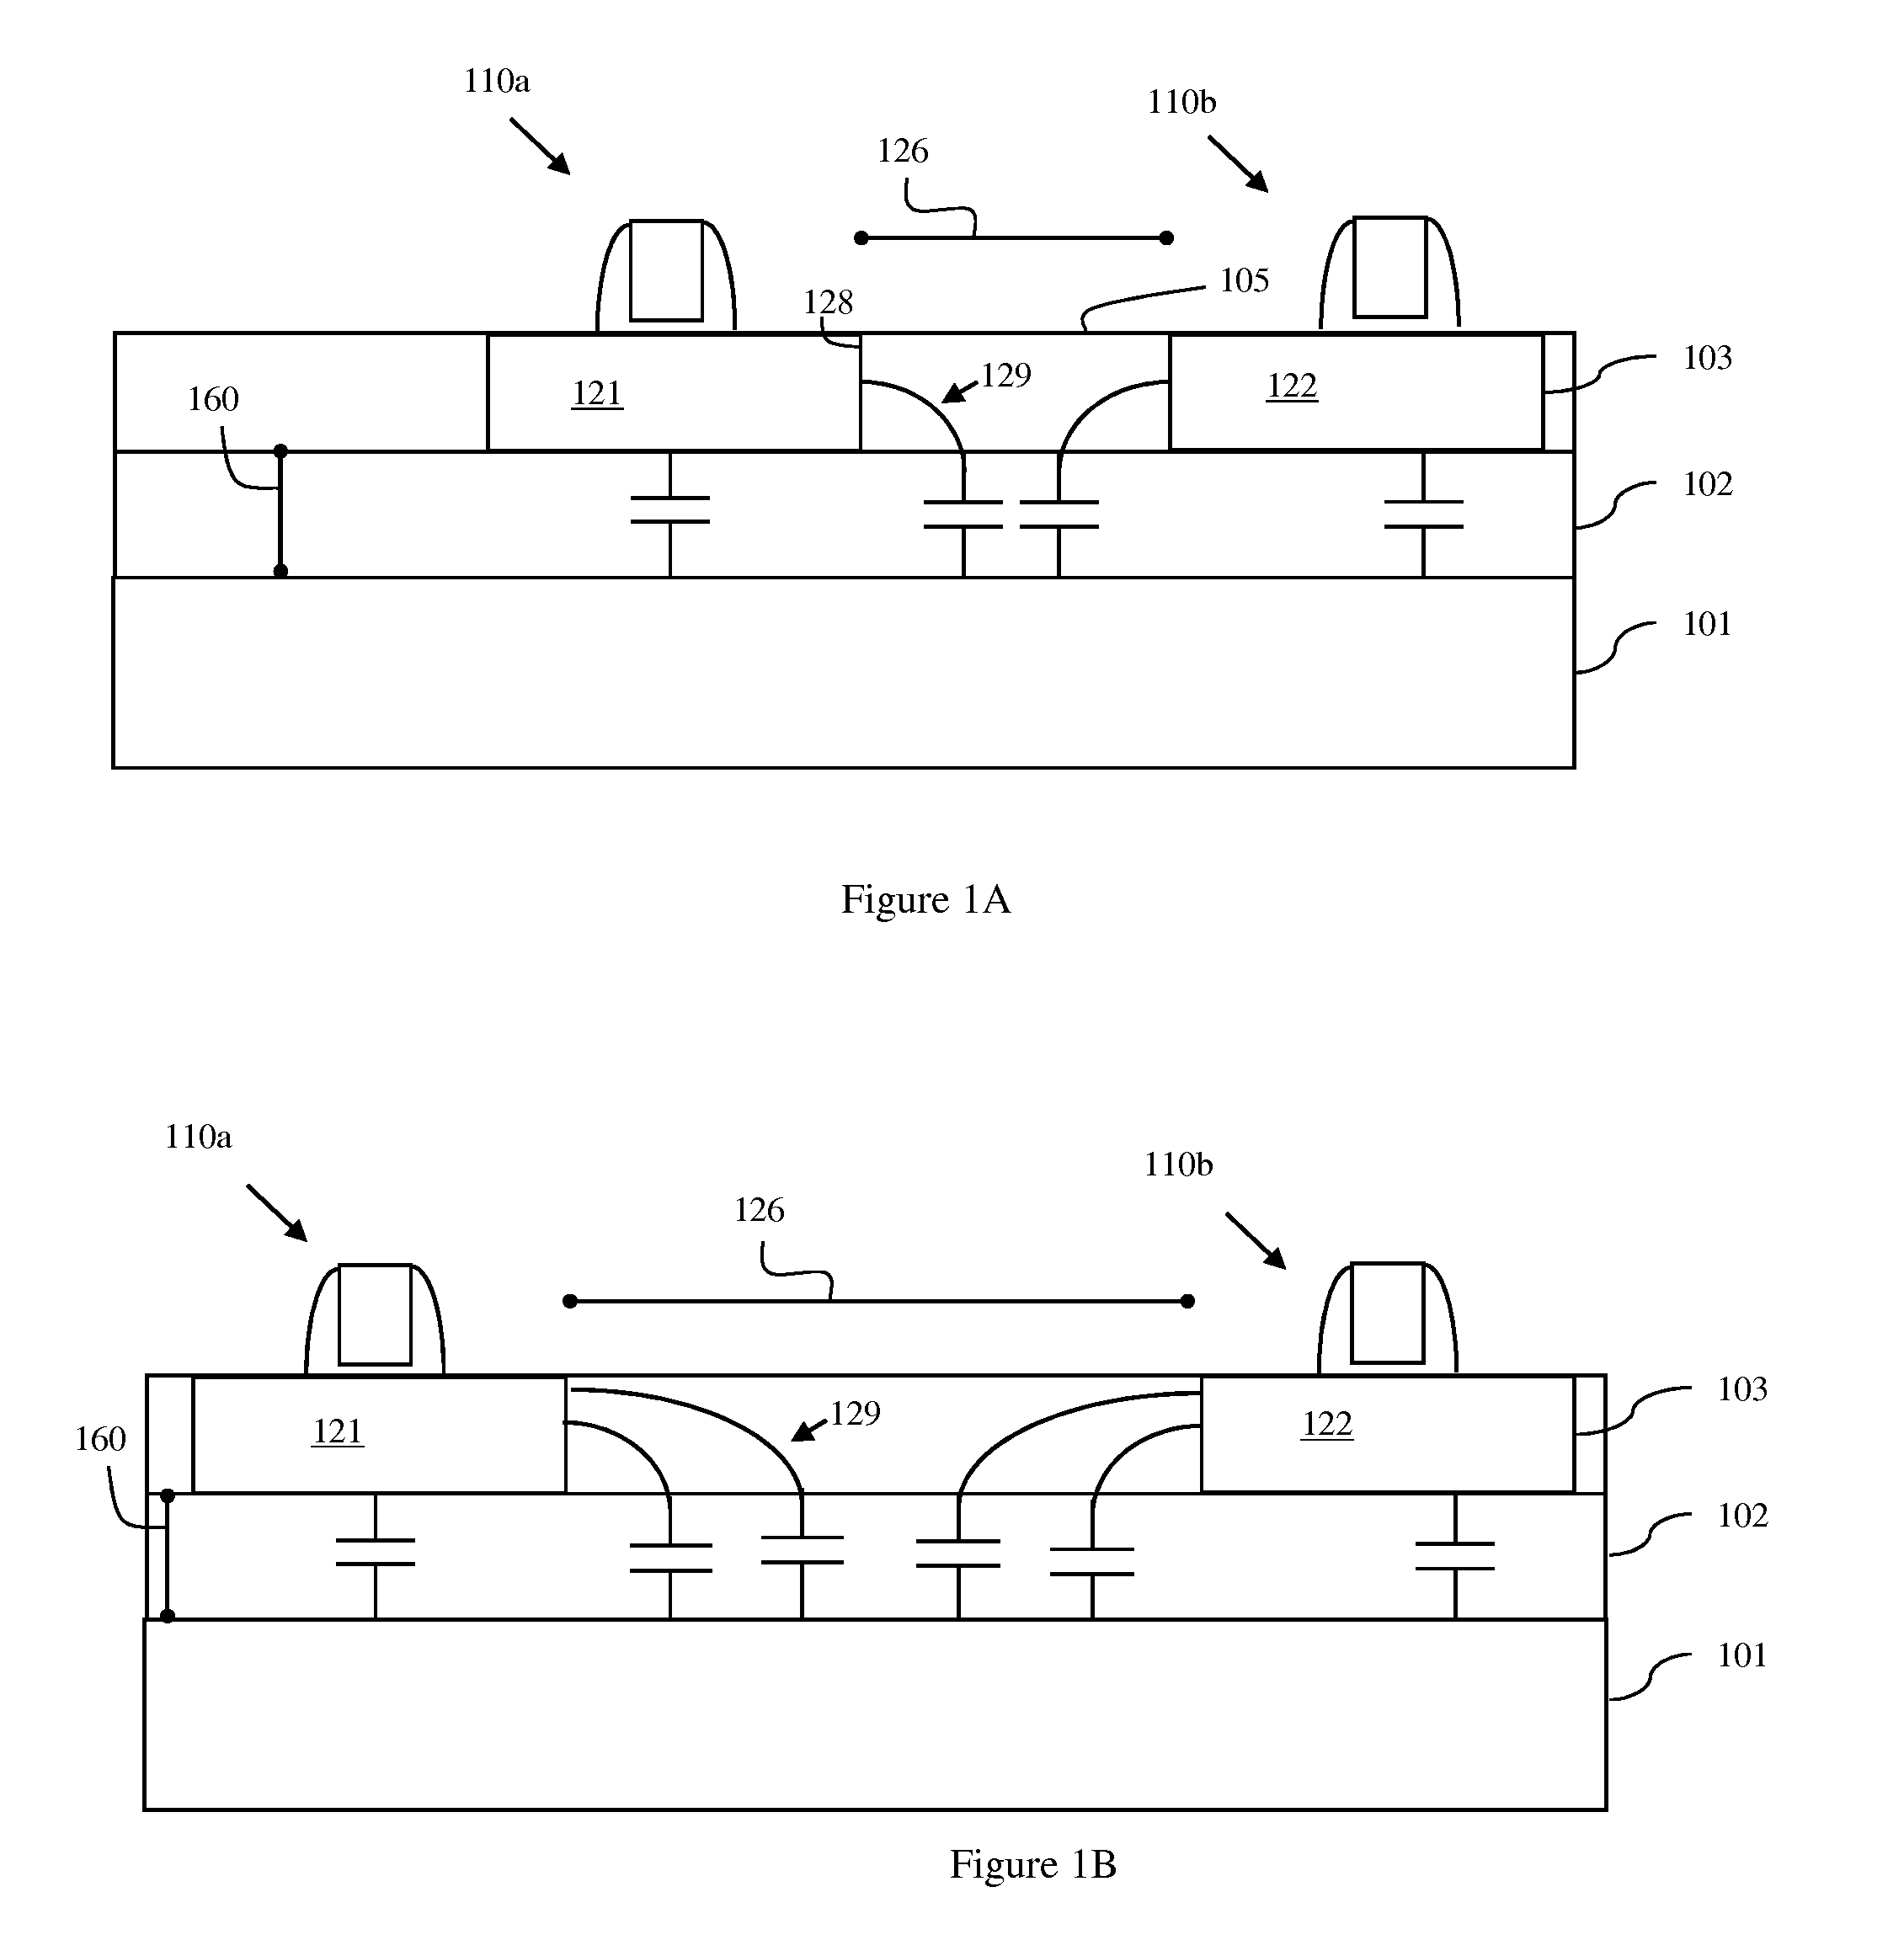 Method, system and program storage device for modeling the capacitance associated with a diffusion region of a silicon-on-insulator device